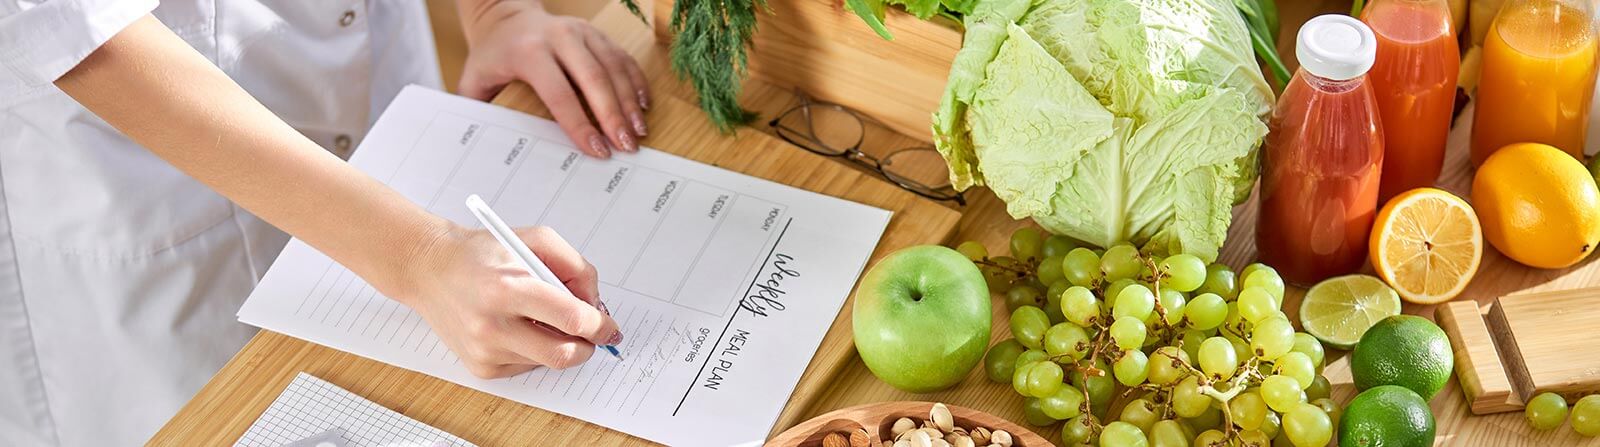 meal planning and nutrition with women's health  consultation